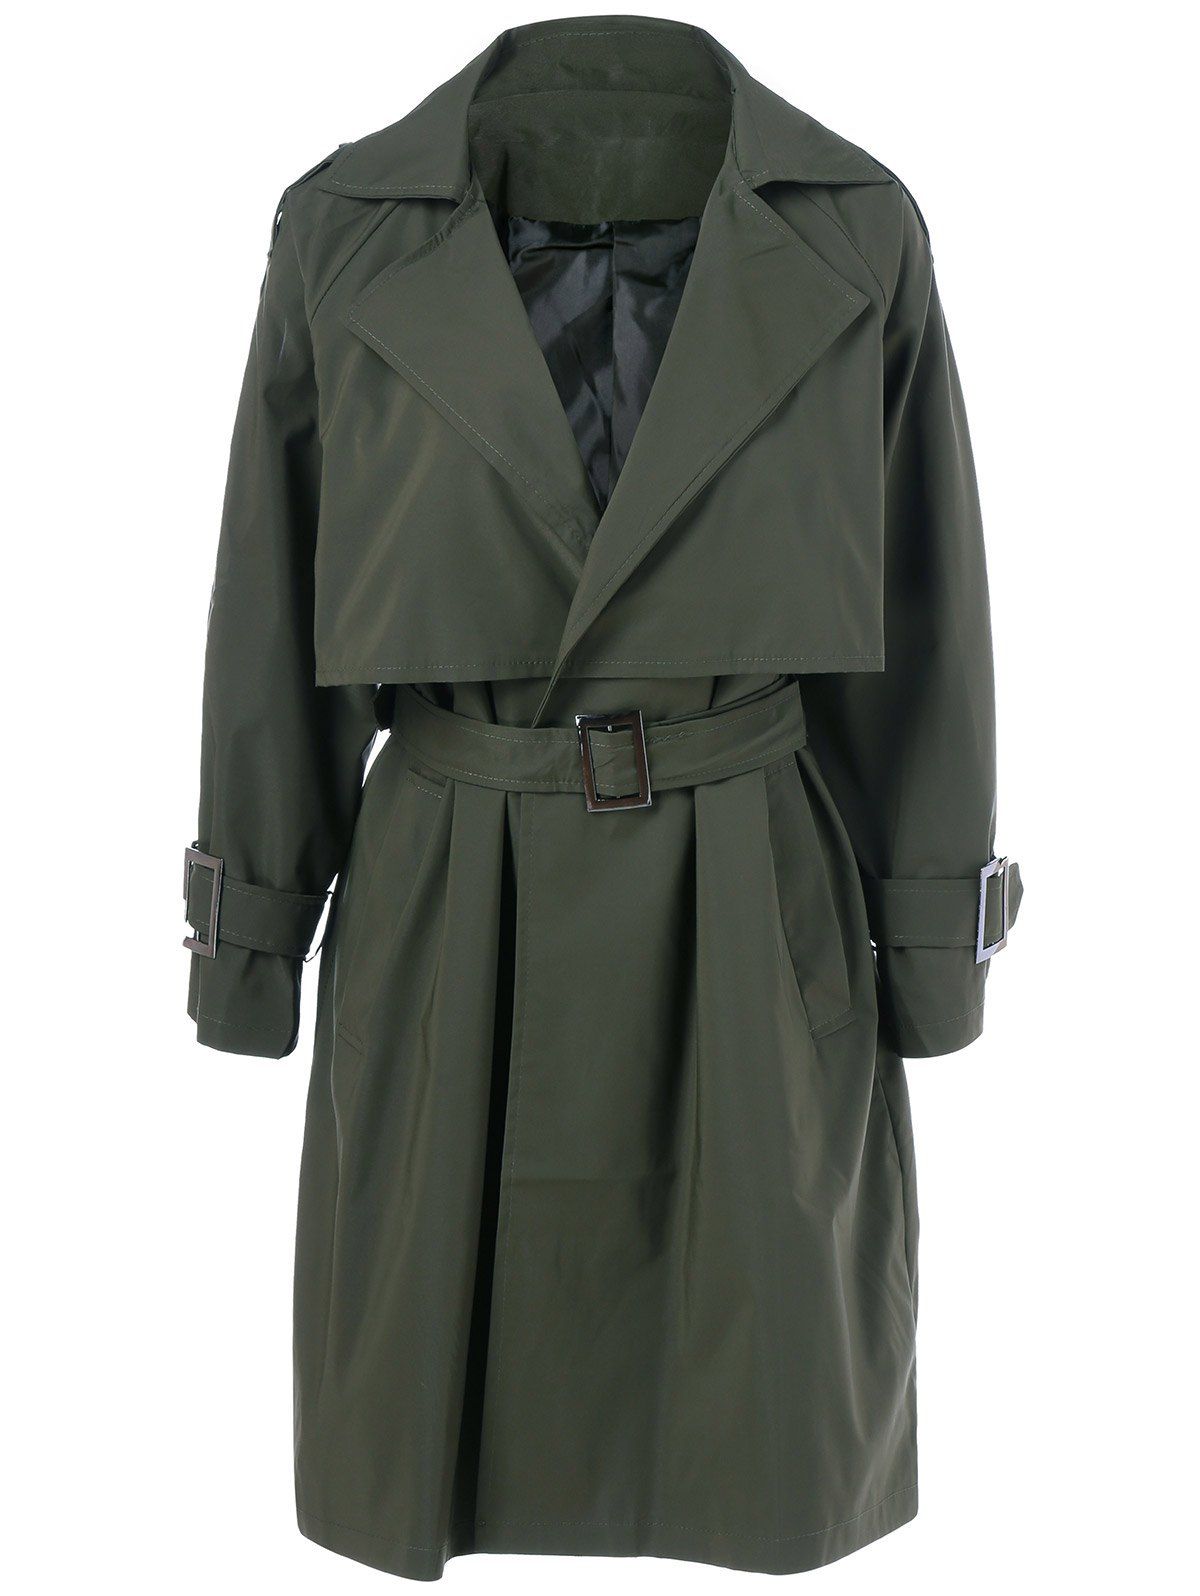 [17% OFF] 2021 Belted Patchwork Trench Coat In ARMY GREEN | DressLily